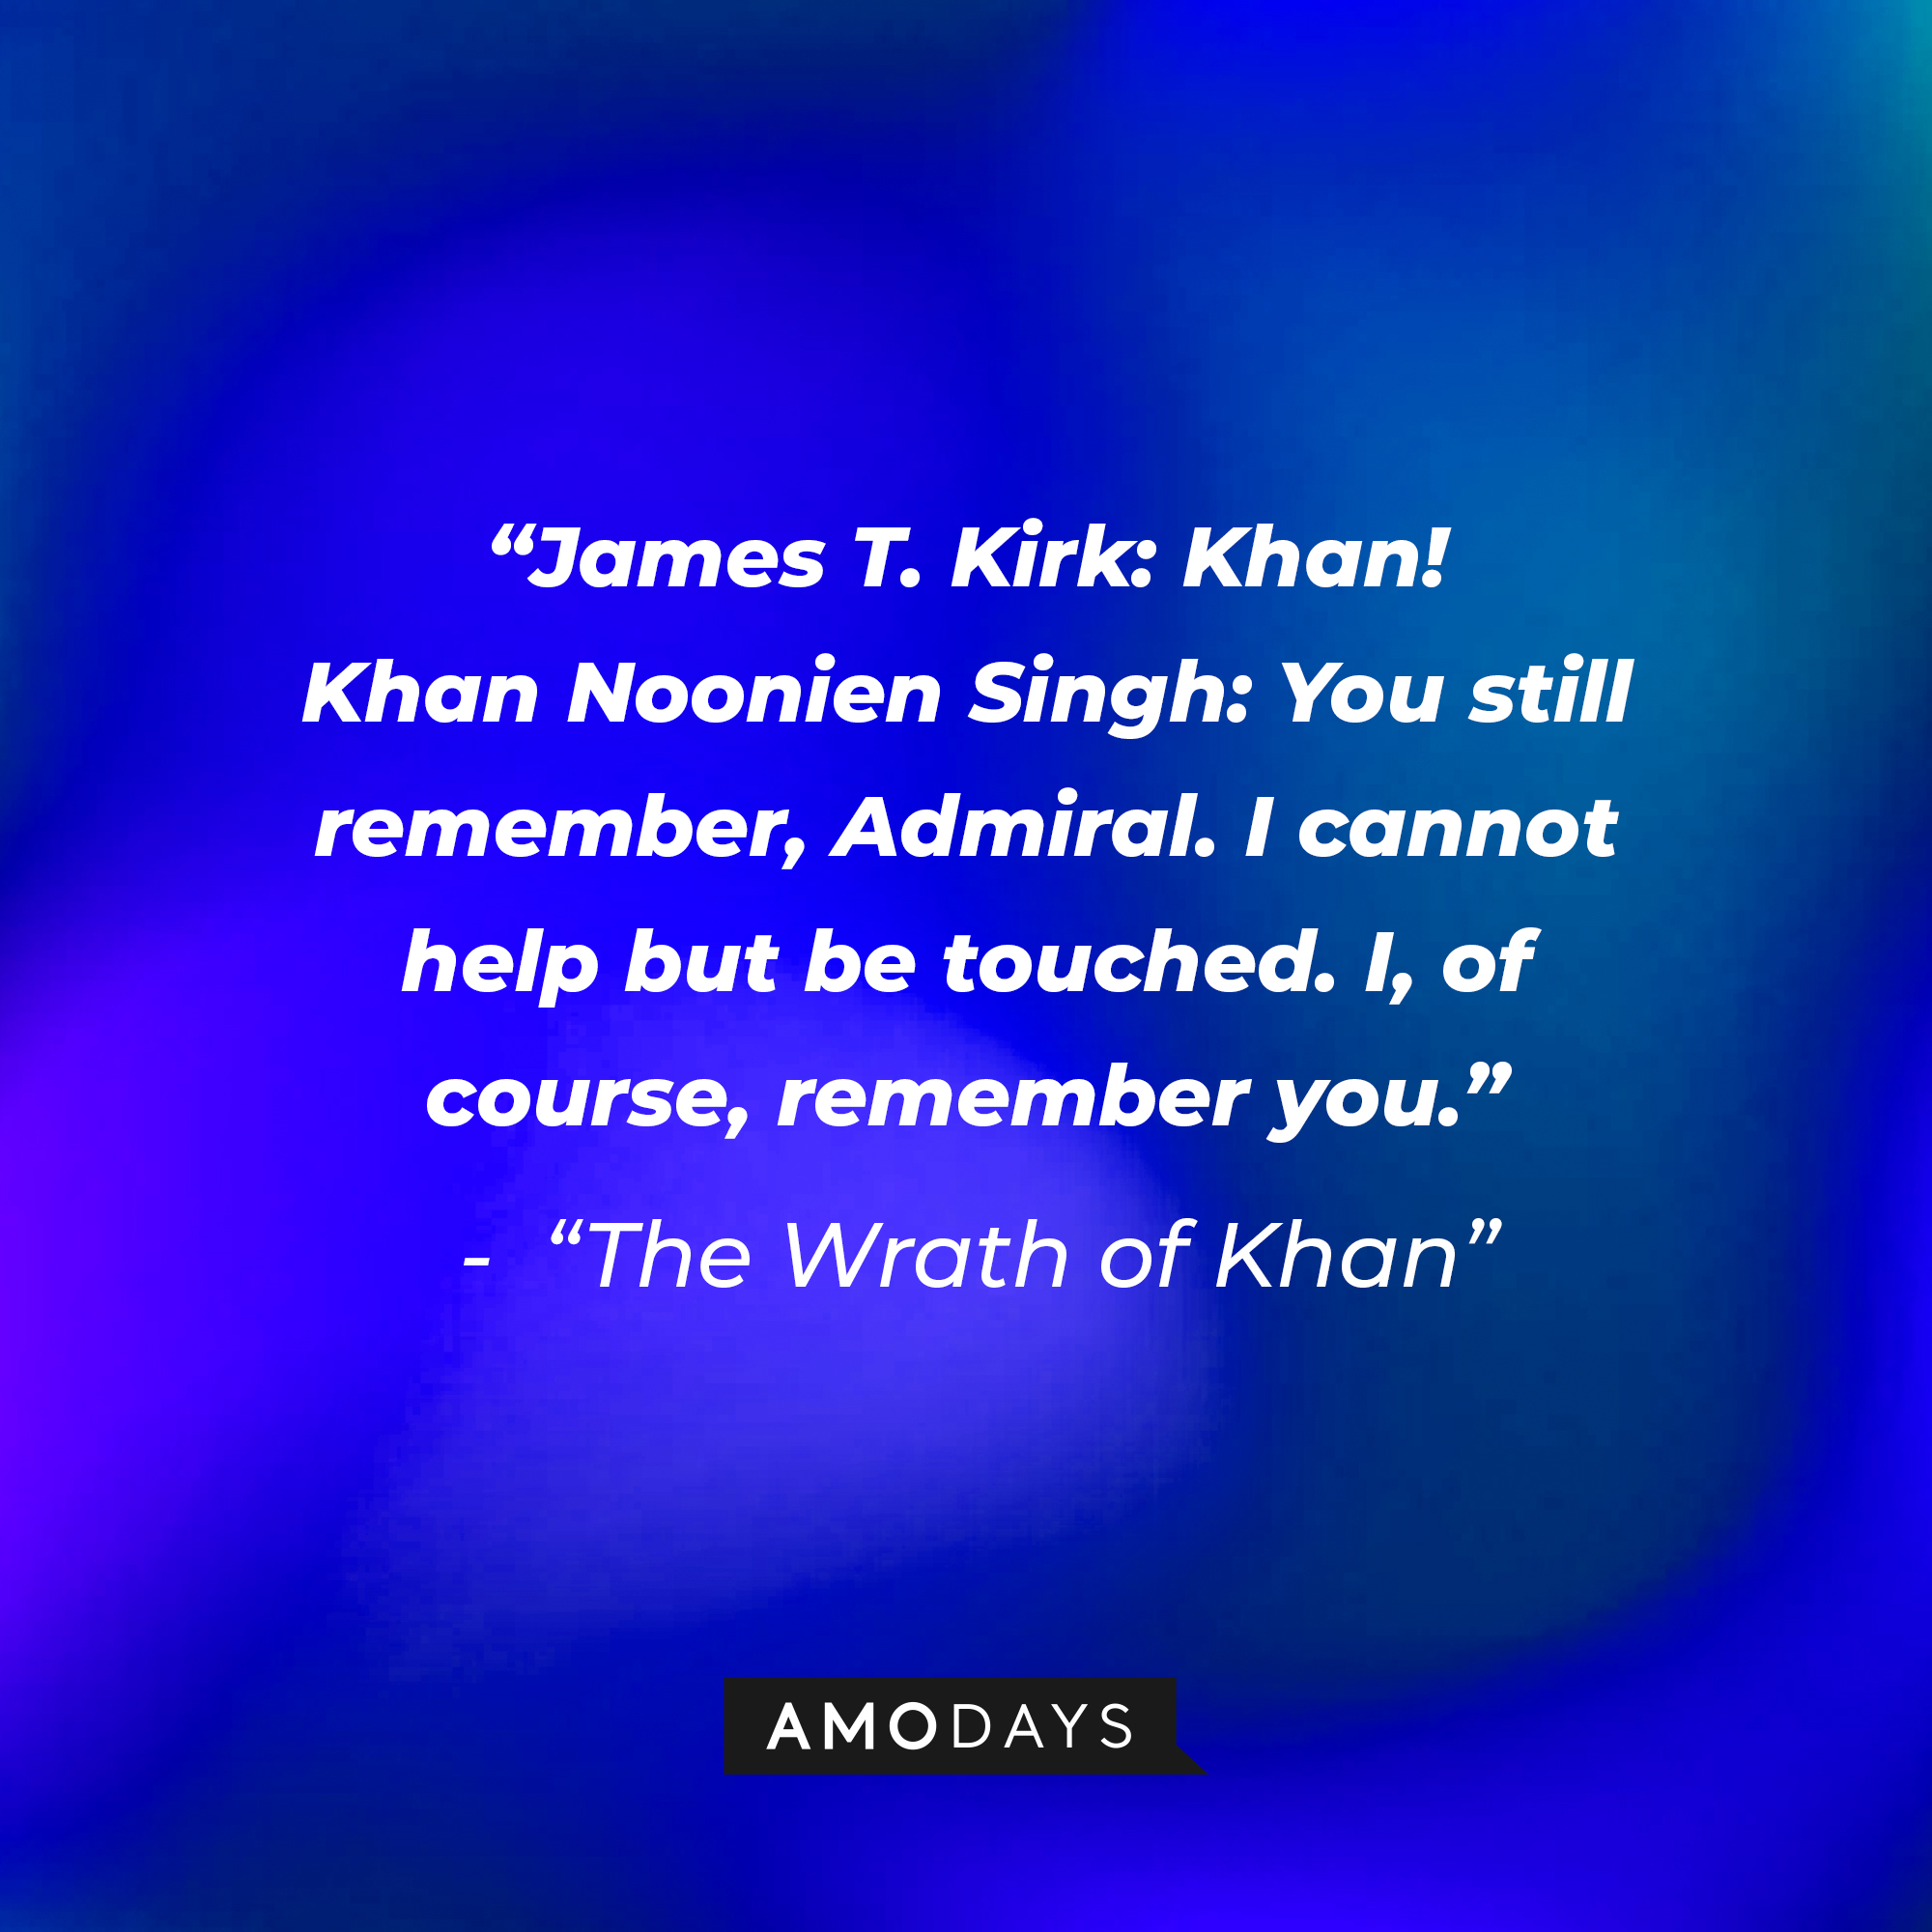 A photo with the dialogue, "James T. Kirk: Khan! Khan Noonien Singh: You still remember, Admiral. I cannot help but be touched. I, of course, remember you." | Source: Amodays